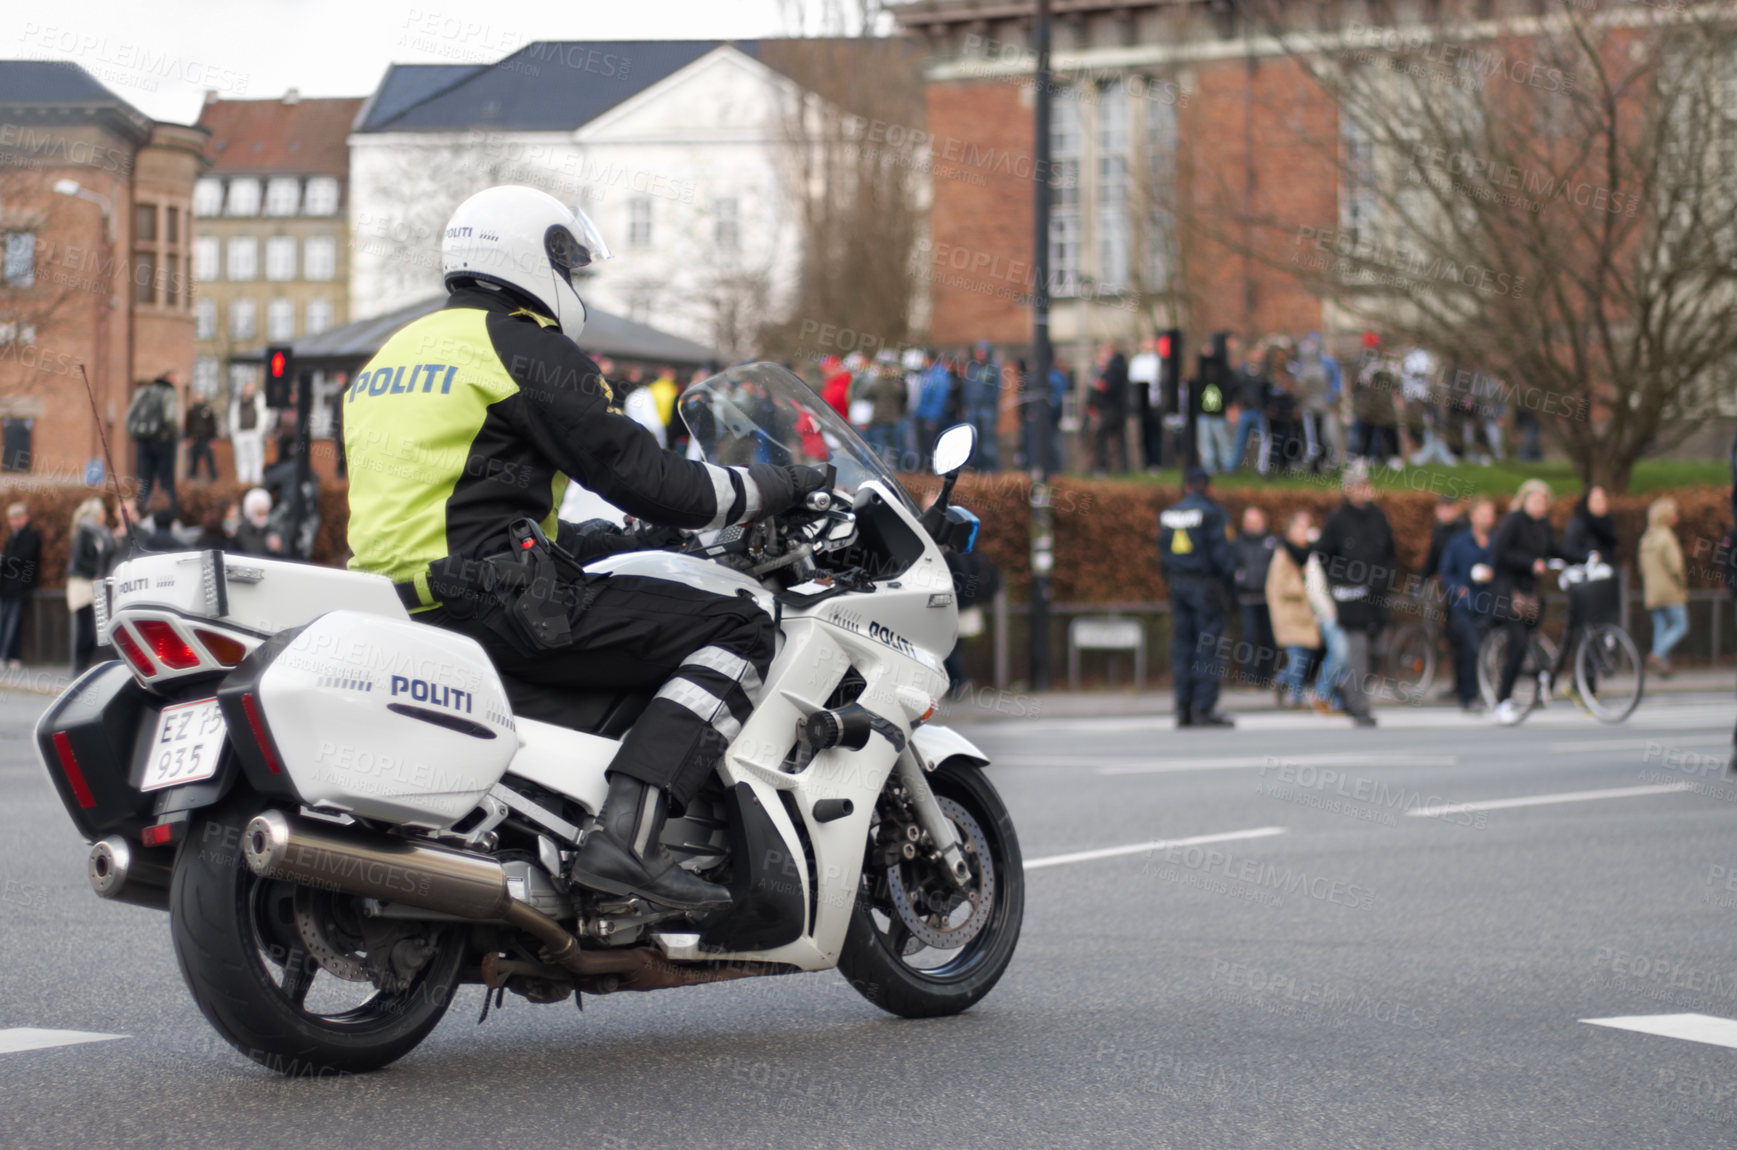 Buy stock photo Emergency, motorbike and police or safety officer working for protection and peace in an urban town in Denmark. Security, law and legal professional or policeman on a motorcycle ready for service